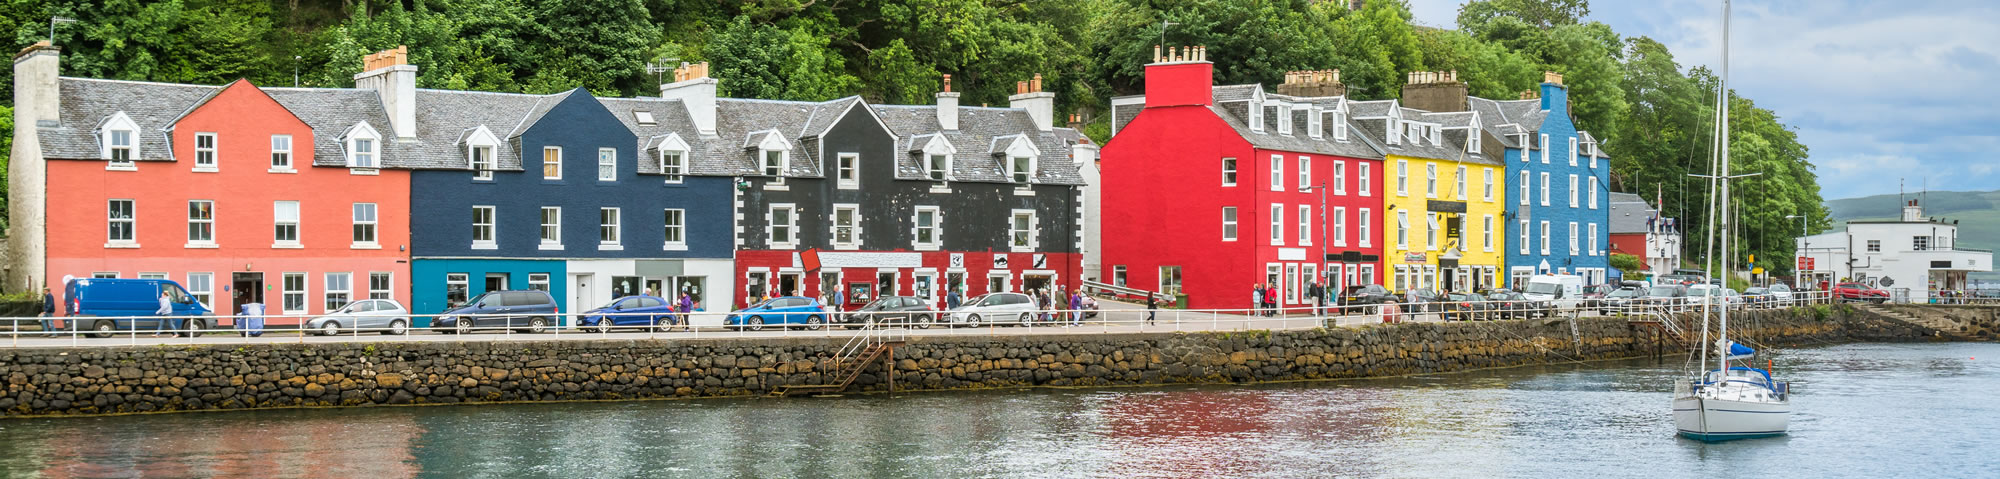 Tobermory, capital of the Isle of Mull in the Scottish Inner Hebrides